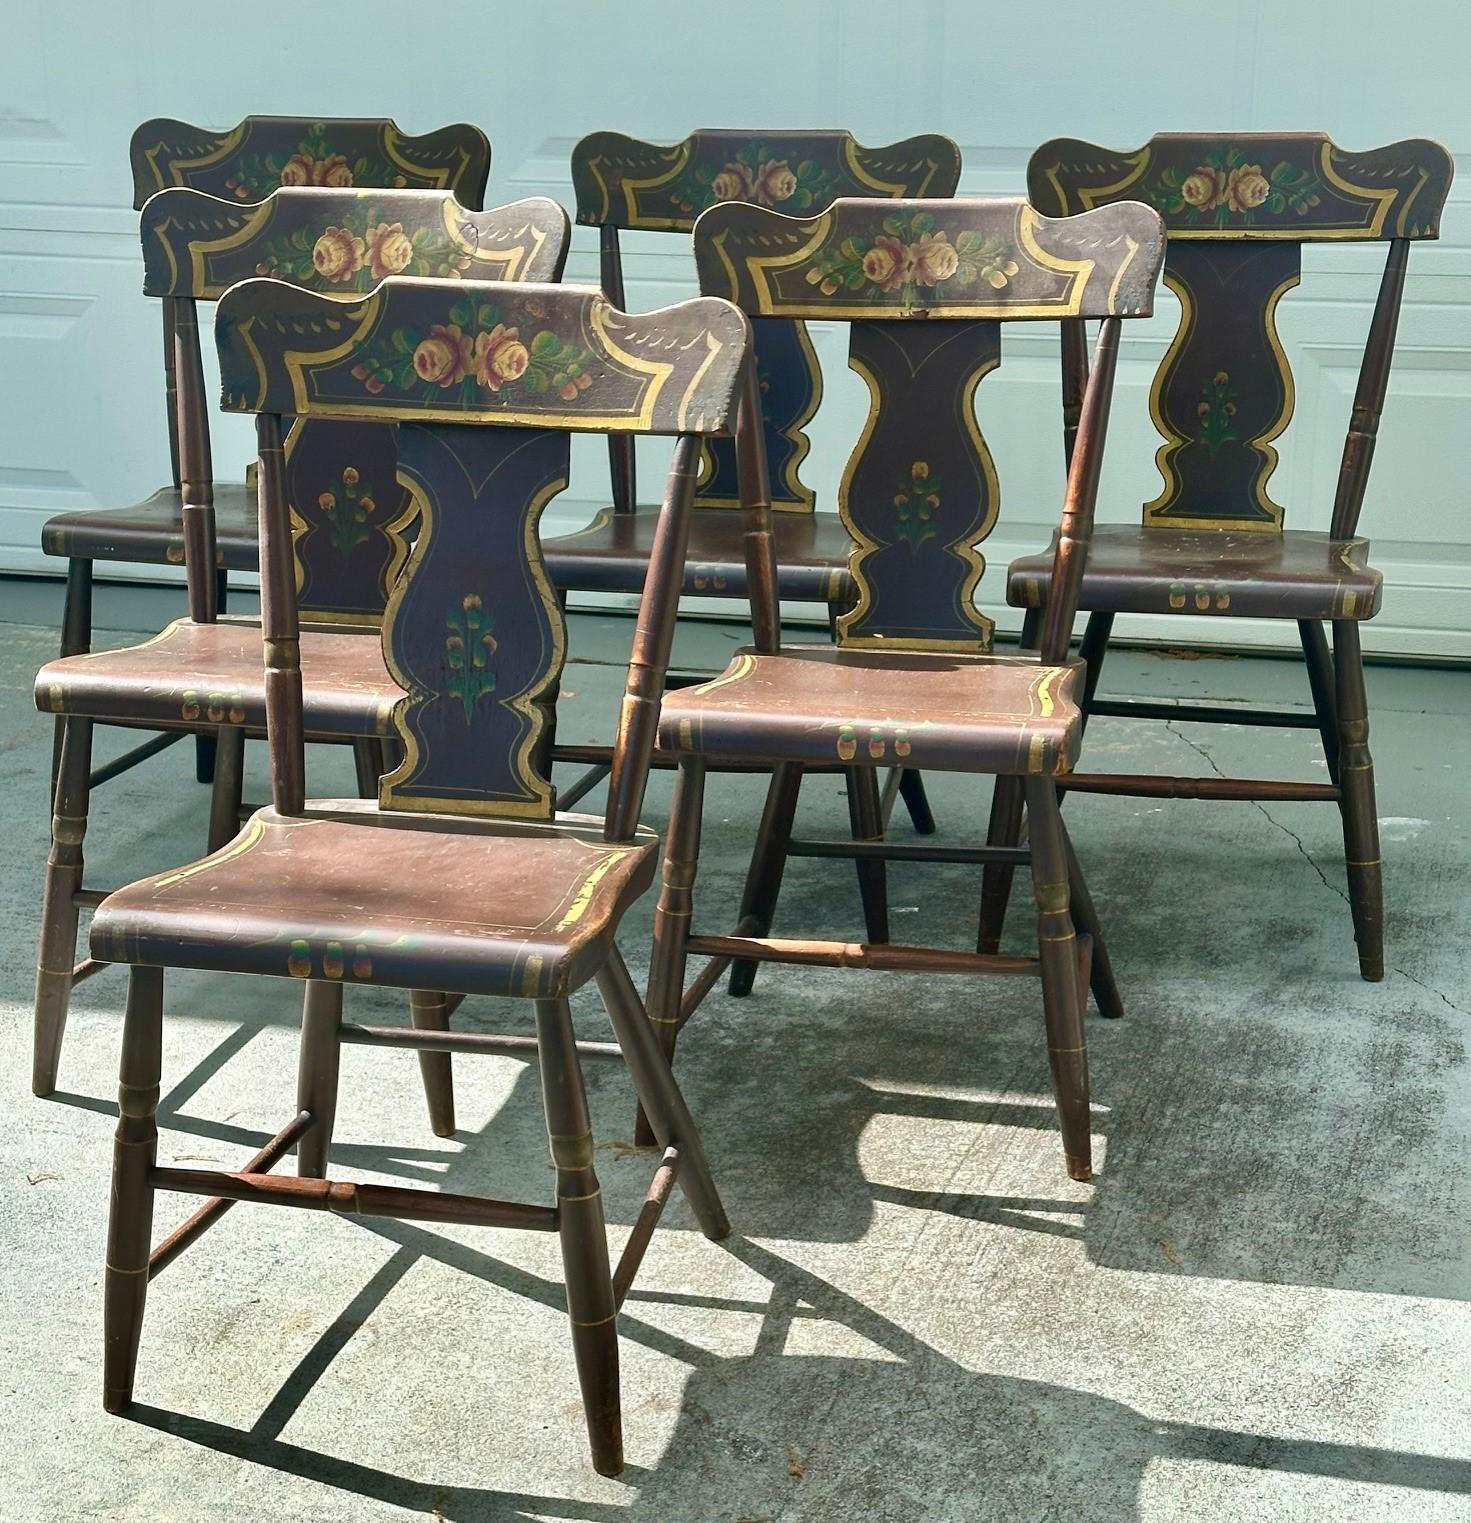 Antique Set of 6 Original Painted Pennsylvania Plank Bottom Chairs.

Rare set of six antique chairs (circa 1850) with Pennsylvania Amish origin. These are Americana at its best. They were probably built by the Lancaster County chair maker, George